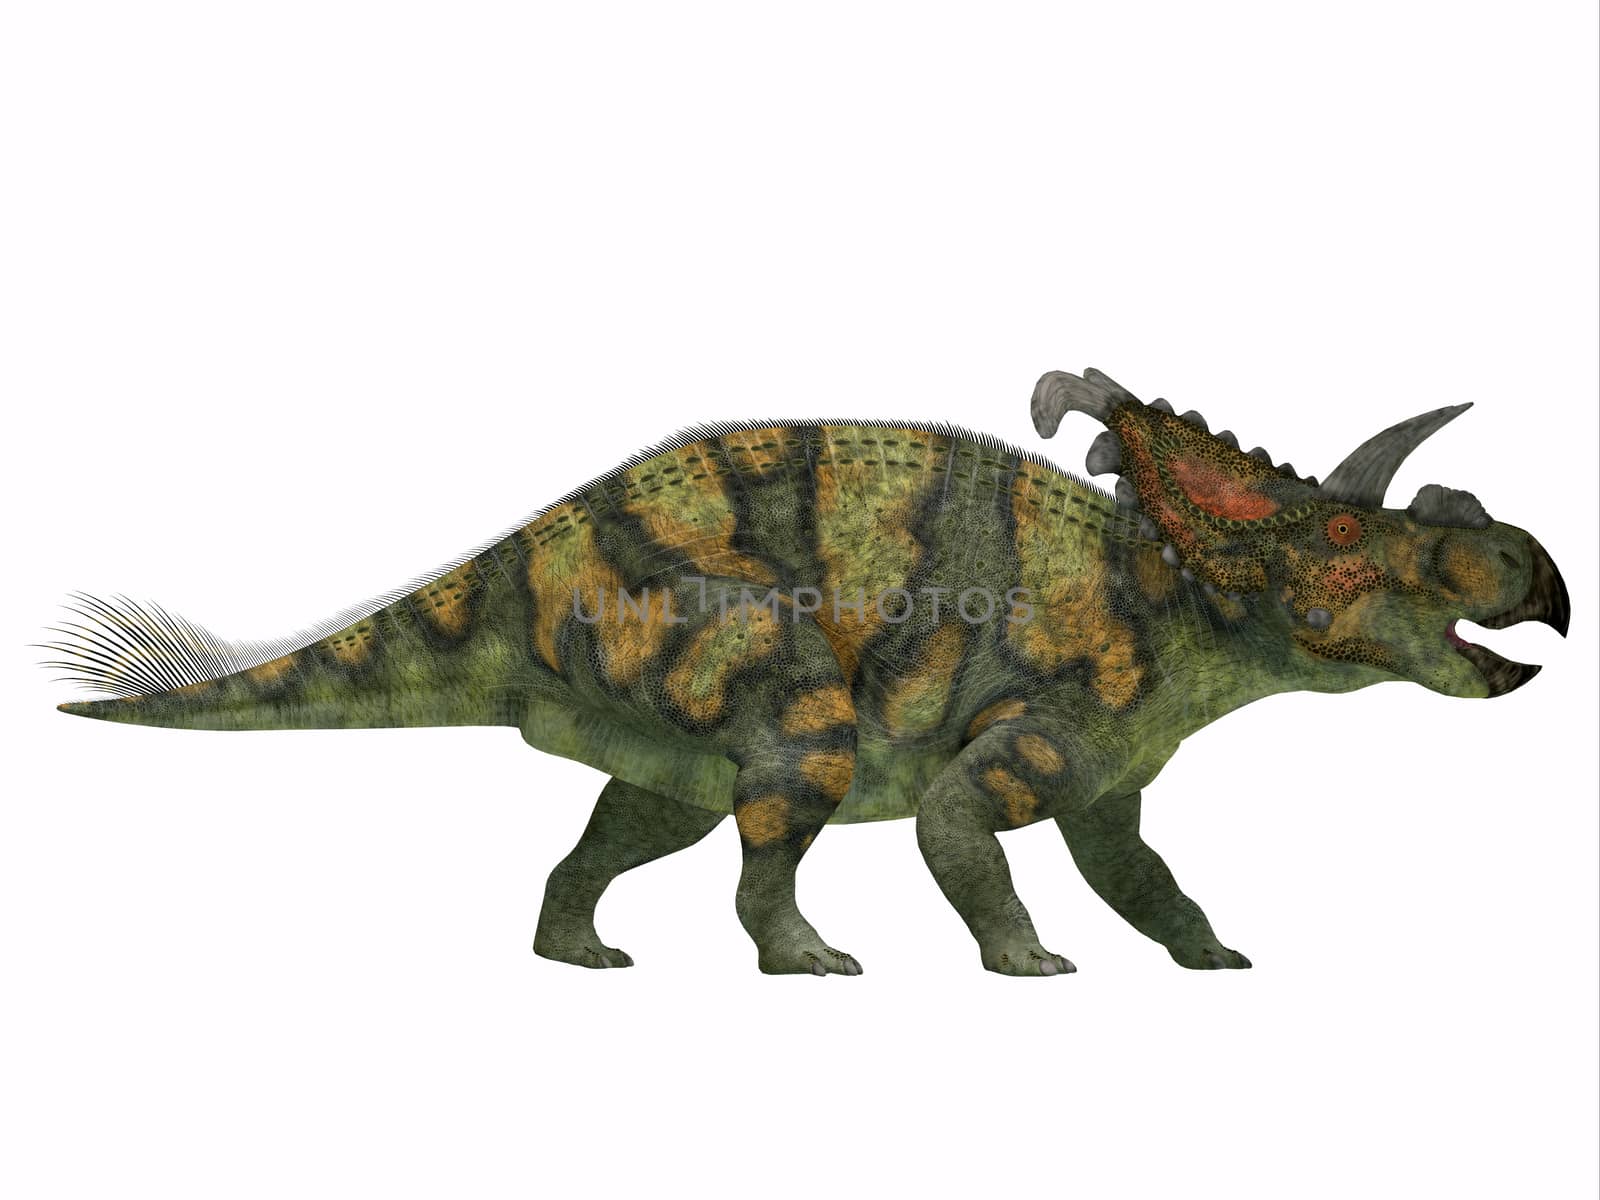 Albertaceratops on White by Catmando